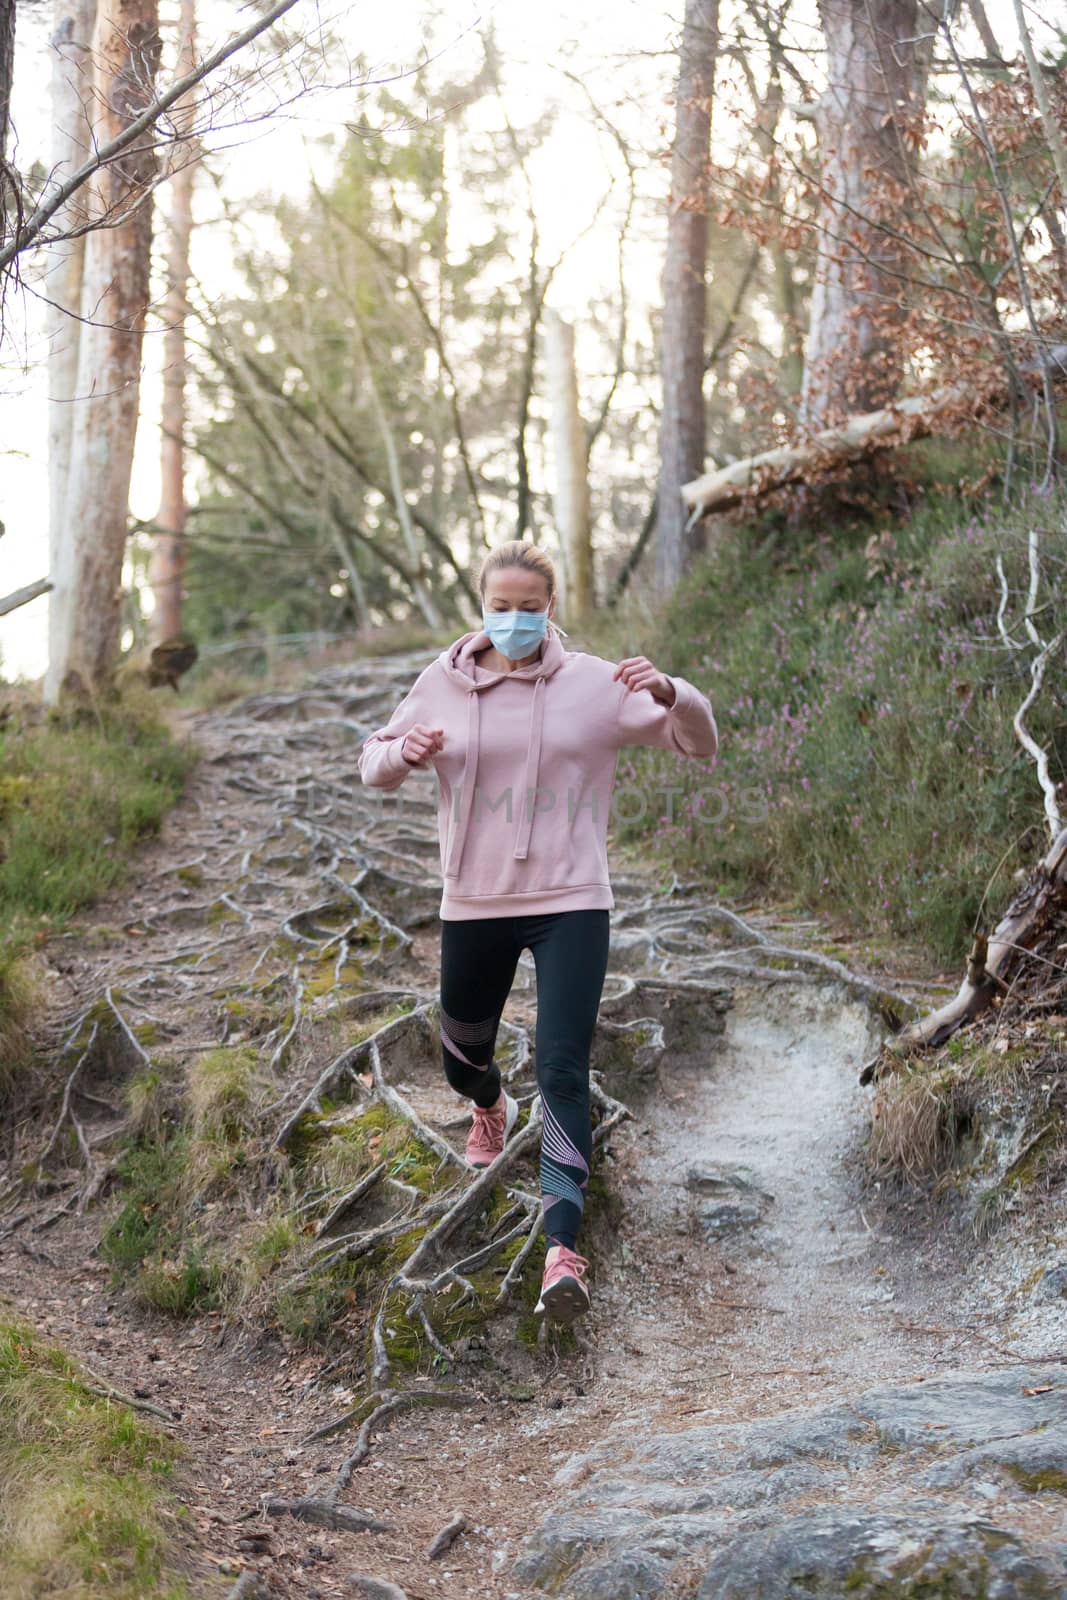 Corona virus, or Covid-19, is spreading all over the world. Portrait of caucasian sporty woman wearing a medical protection face mask while running in nature. by kasto